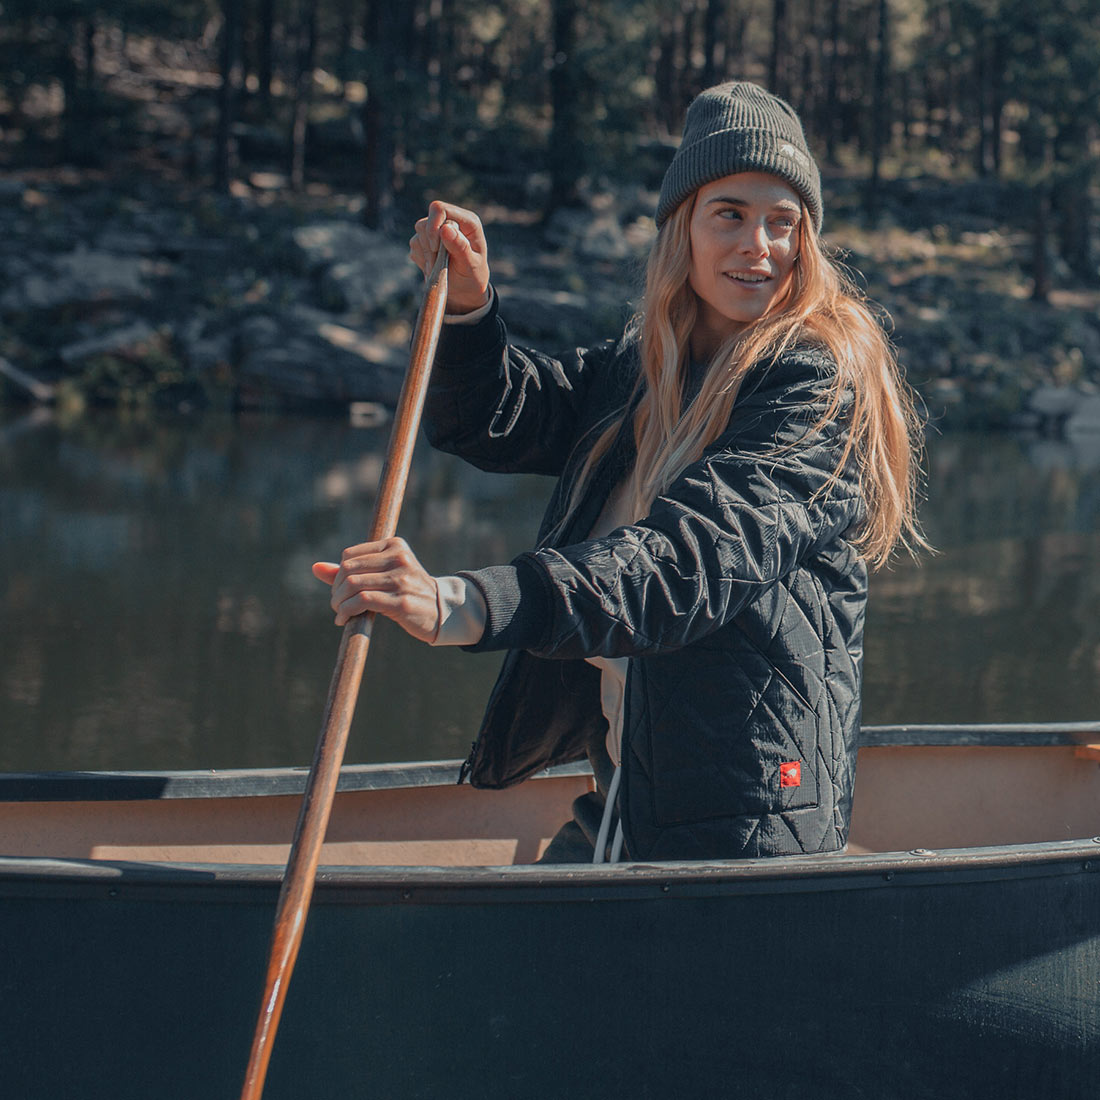 A woman in a Guinness Quilted Utility Zip Up jacket paddles a waterproof black canoe.